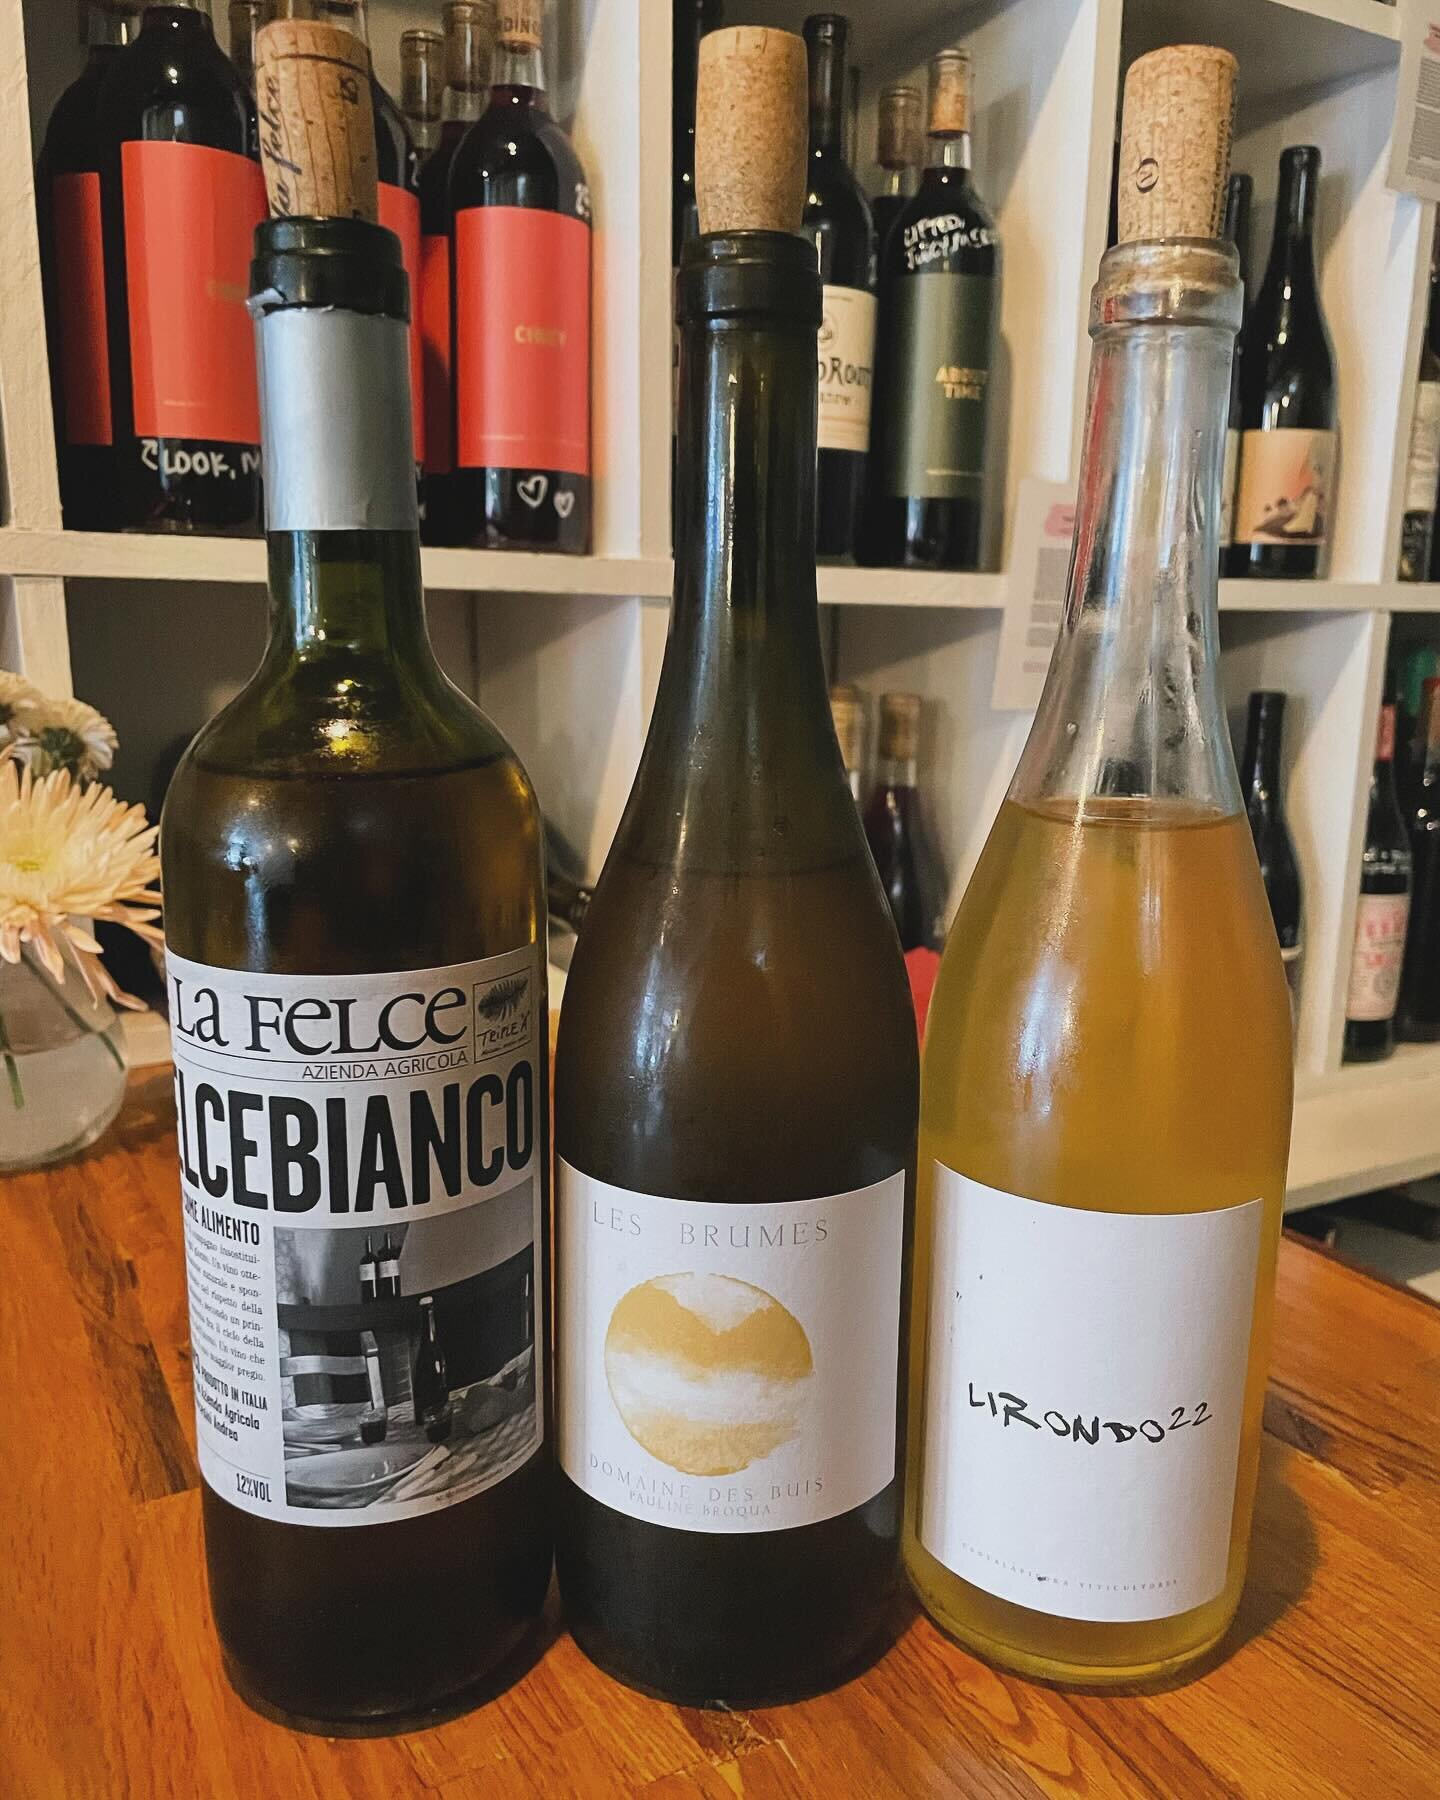 A pot o&rsquo; gold for this weekend&rsquo;s featured flight! Three golden yellow white wines that are sure to bring lots of luck 🍀 $17 for all 3

La Felce FelceBianco &bull; Malvasia + Trebbiano + Vermentino
Domaine des Buis Les Brumes &bull; Cheni